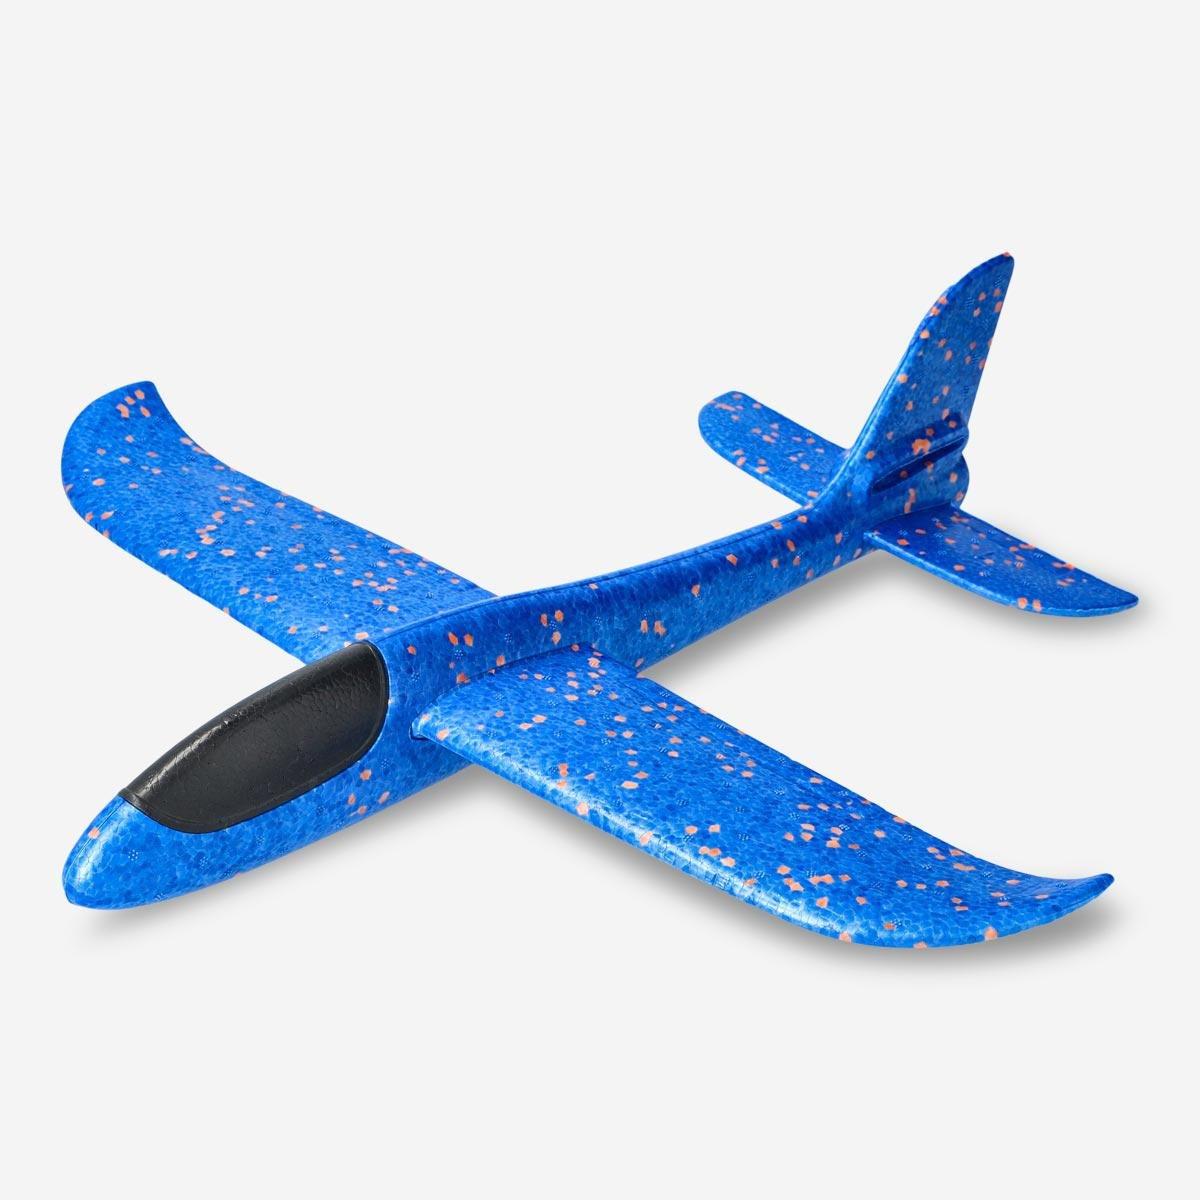 Blue build-your-own airplane